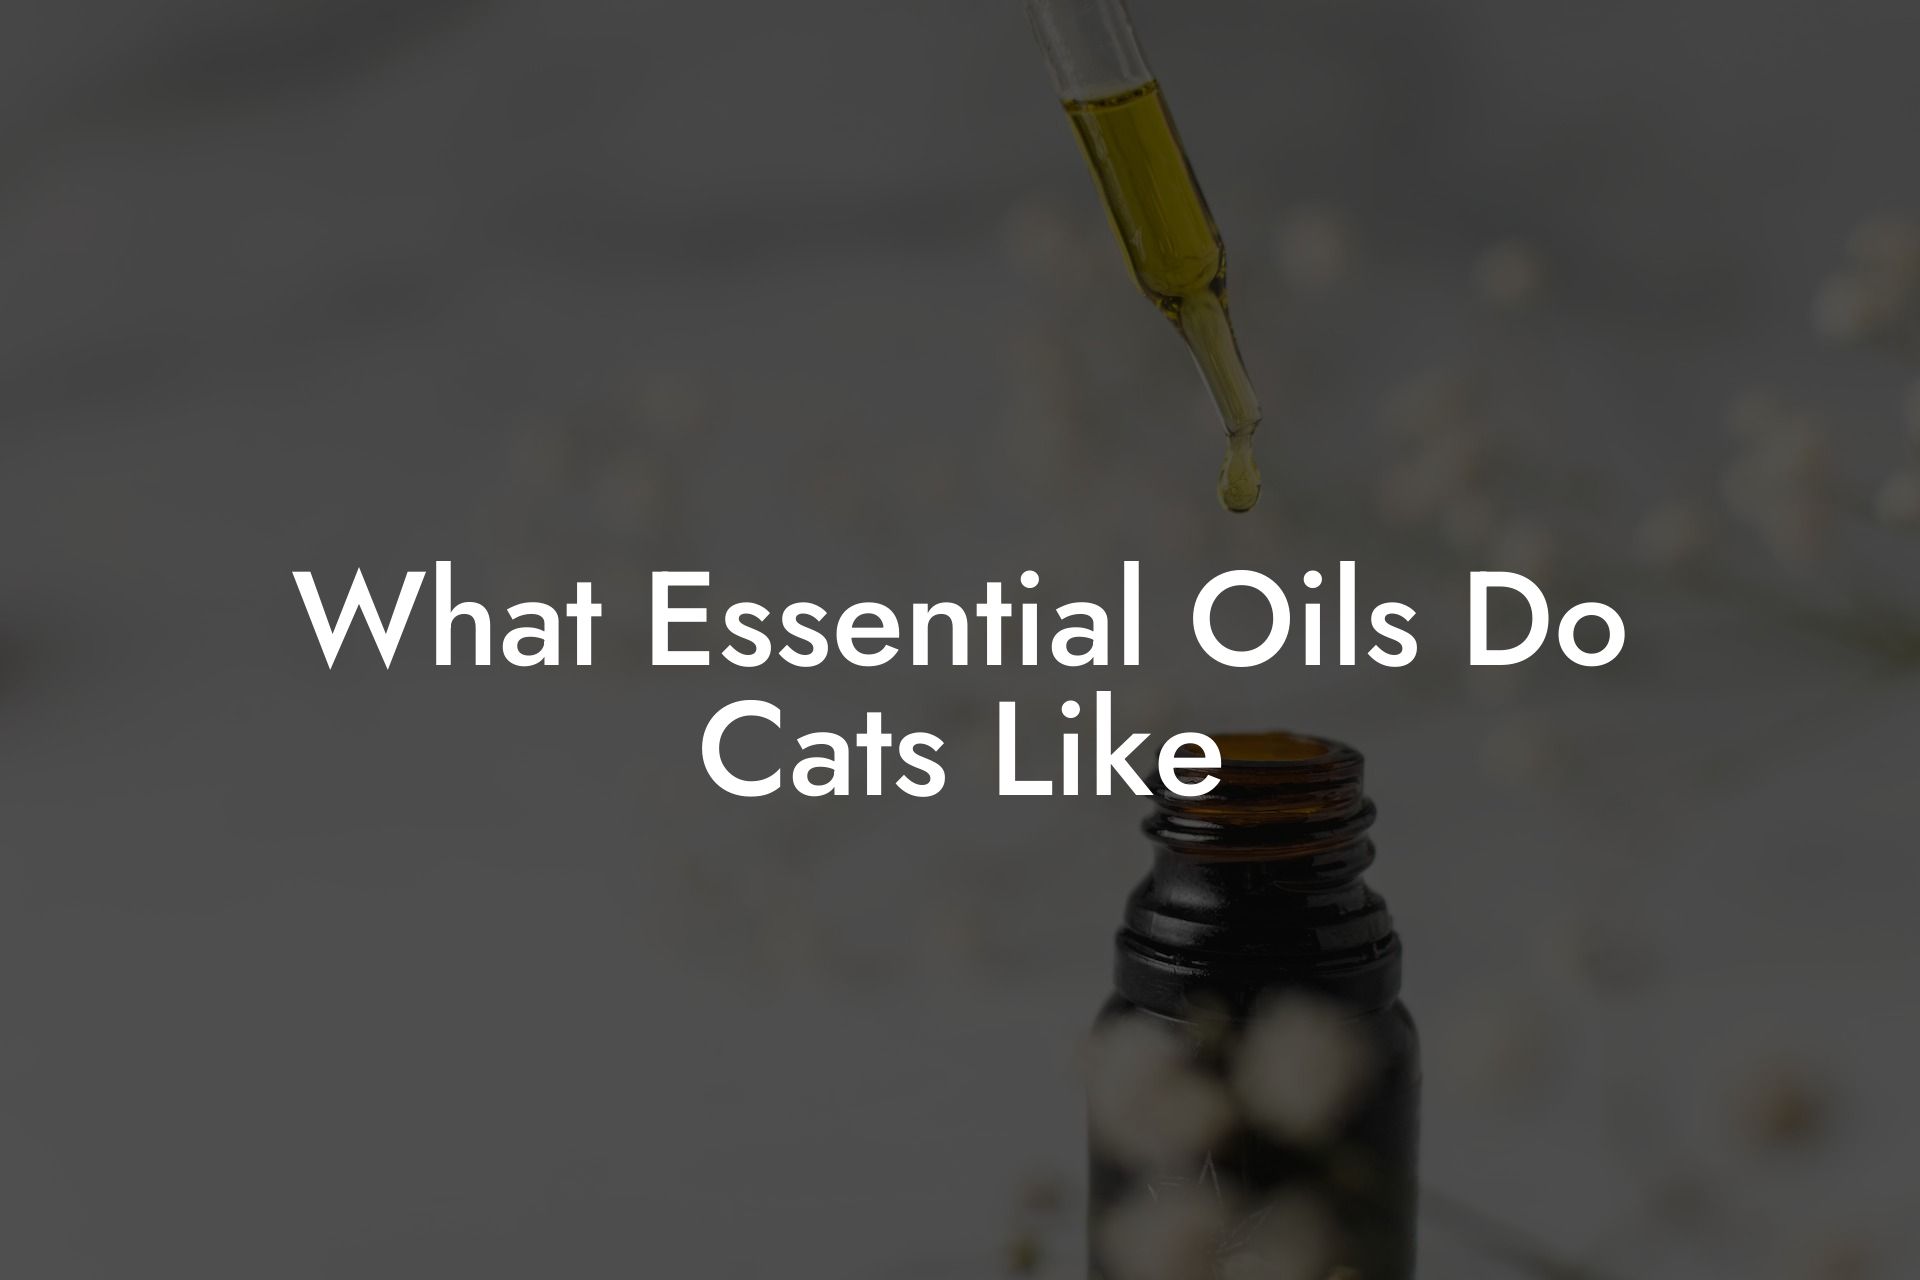 What Essential Oils Do Cats Like